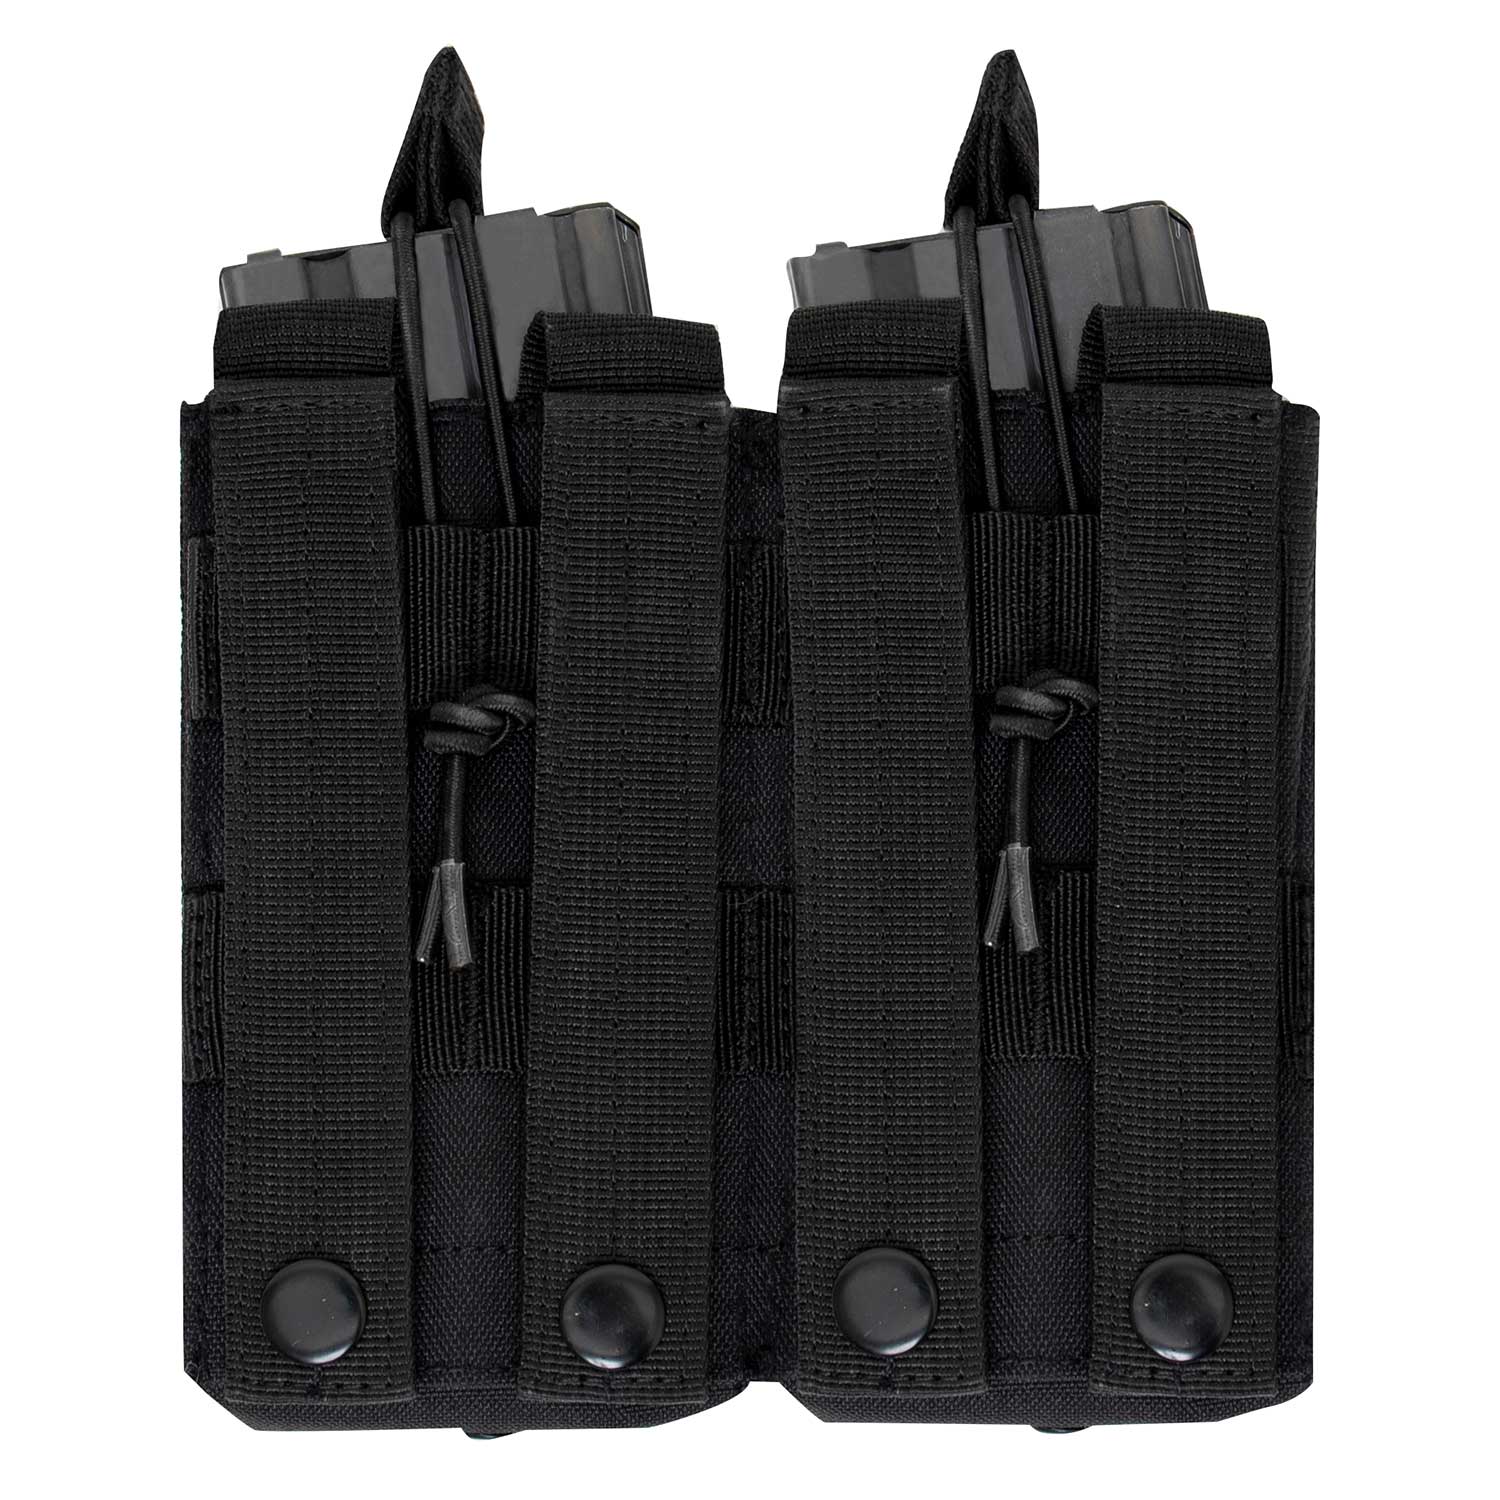 Rothco Black MOLLE Open Top Double Mag Pouch - Robbins Airsoft